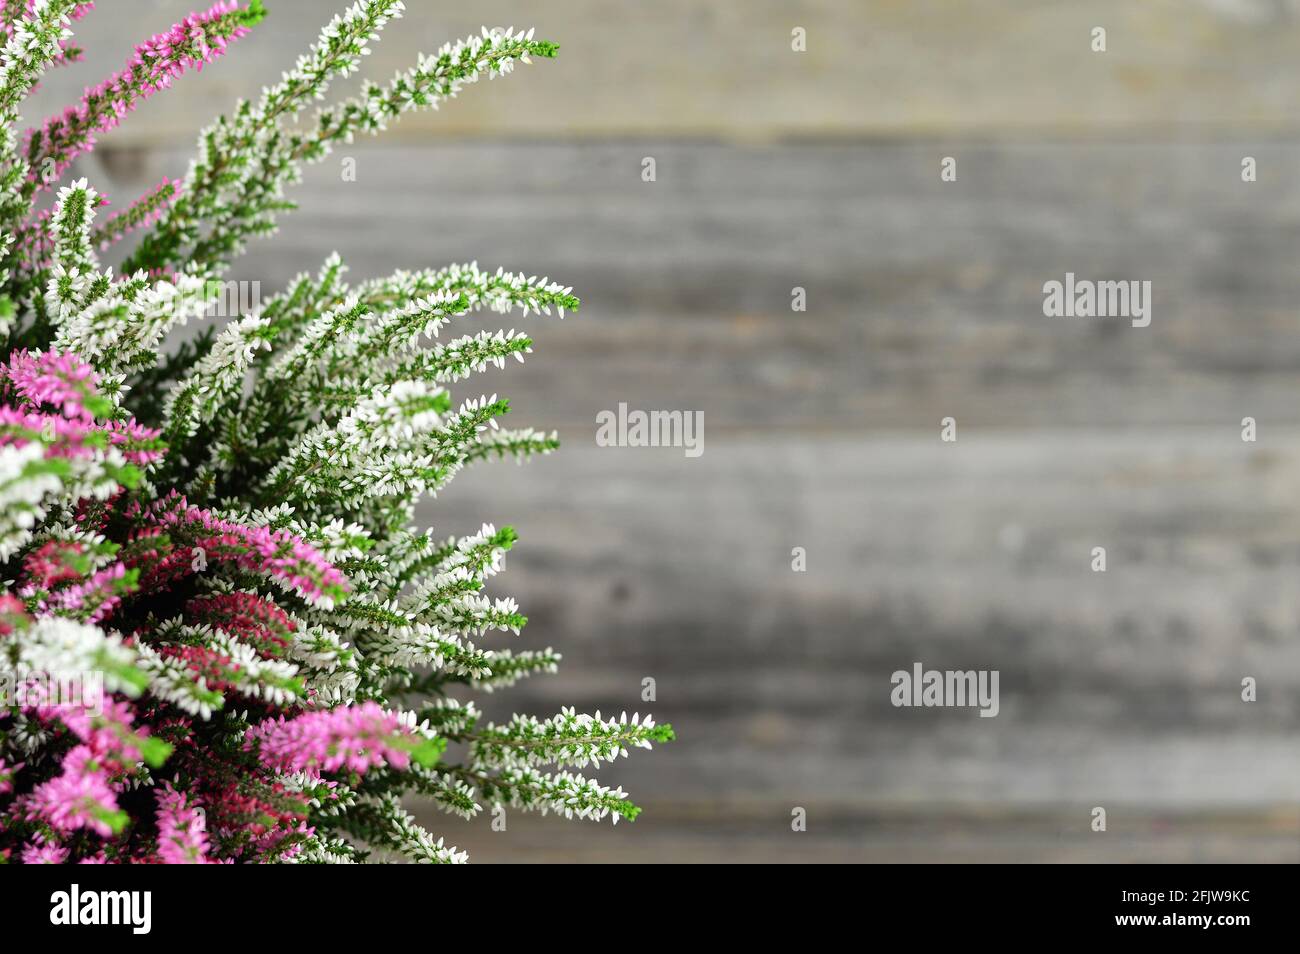 Heather flowers on wooden background Stock Photo